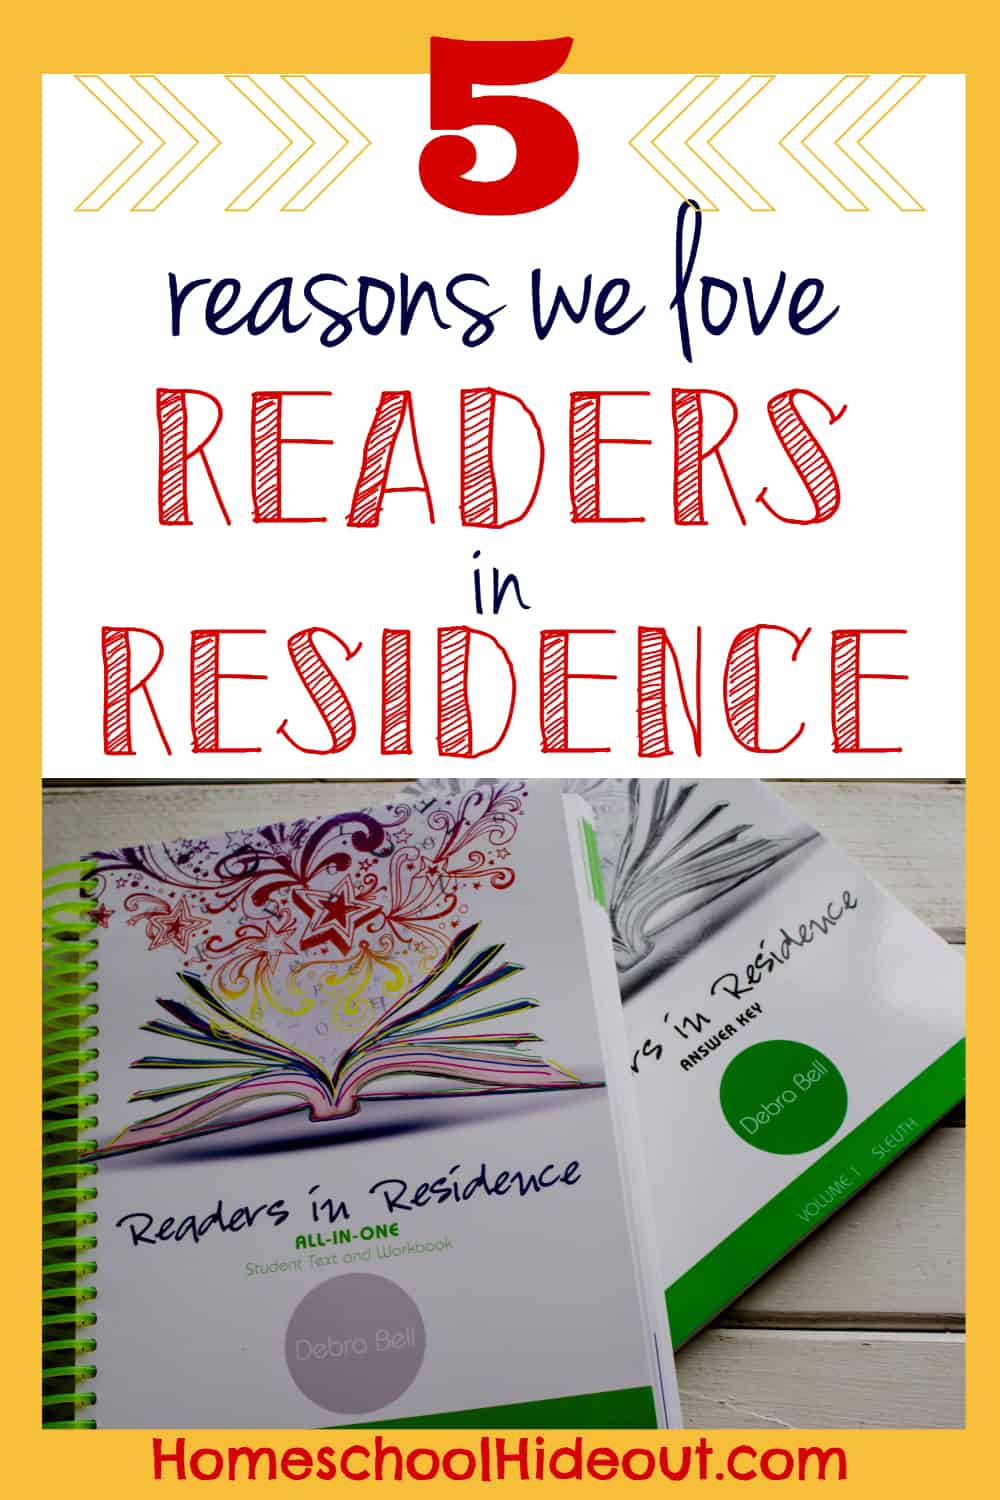 Apologia's Readers in Residence is our new favorite homeschool reading curriculum!